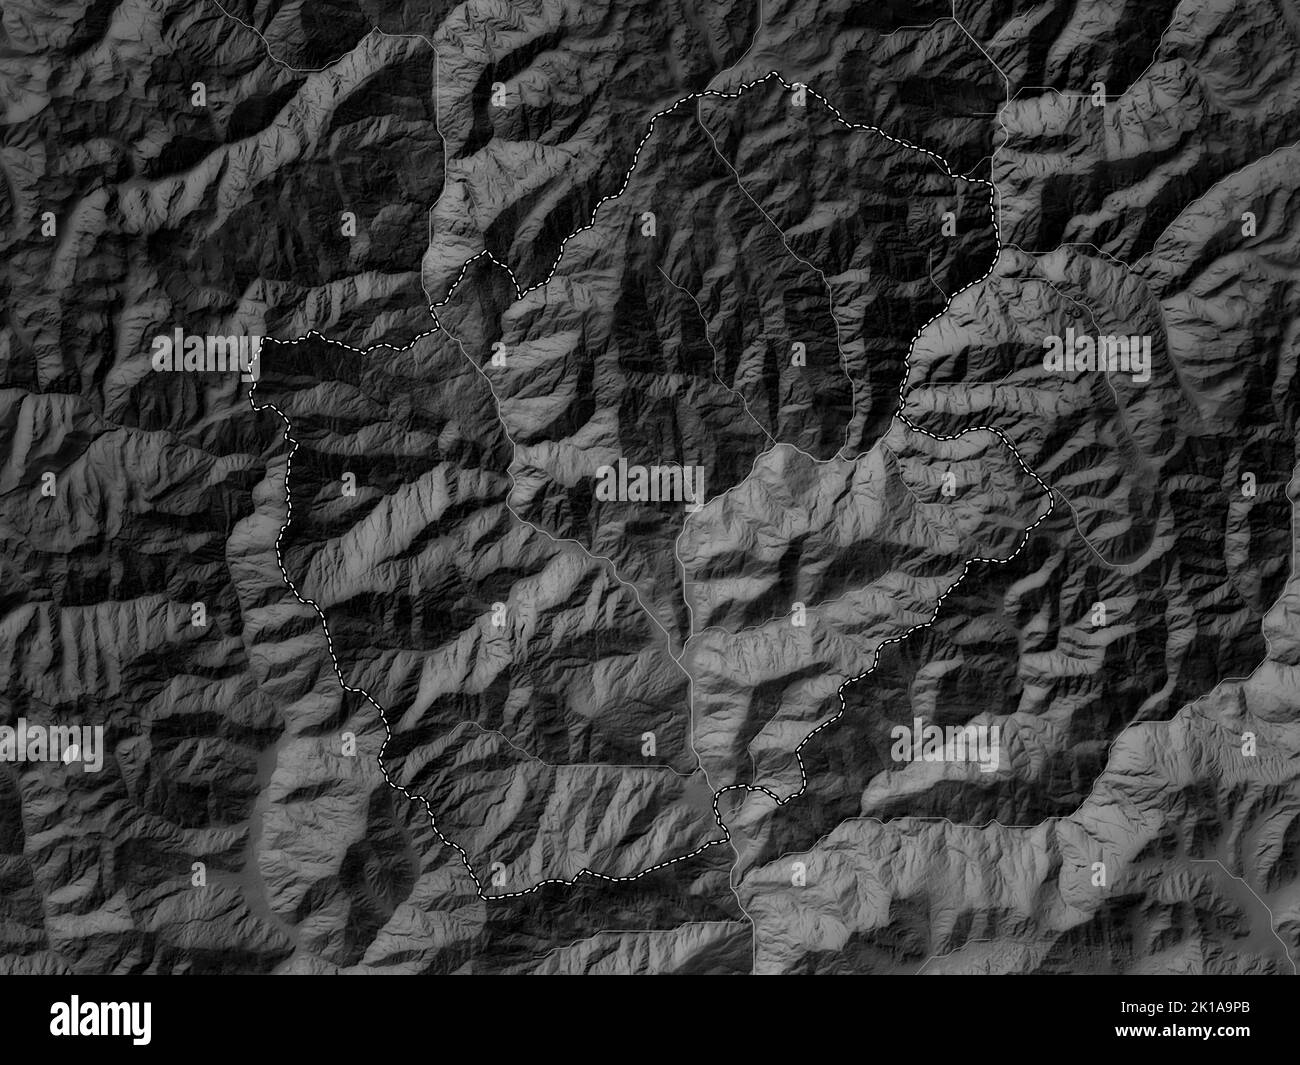 Punakha, district of Bhutan. Grayscale elevation map with lakes and rivers Stock Photo